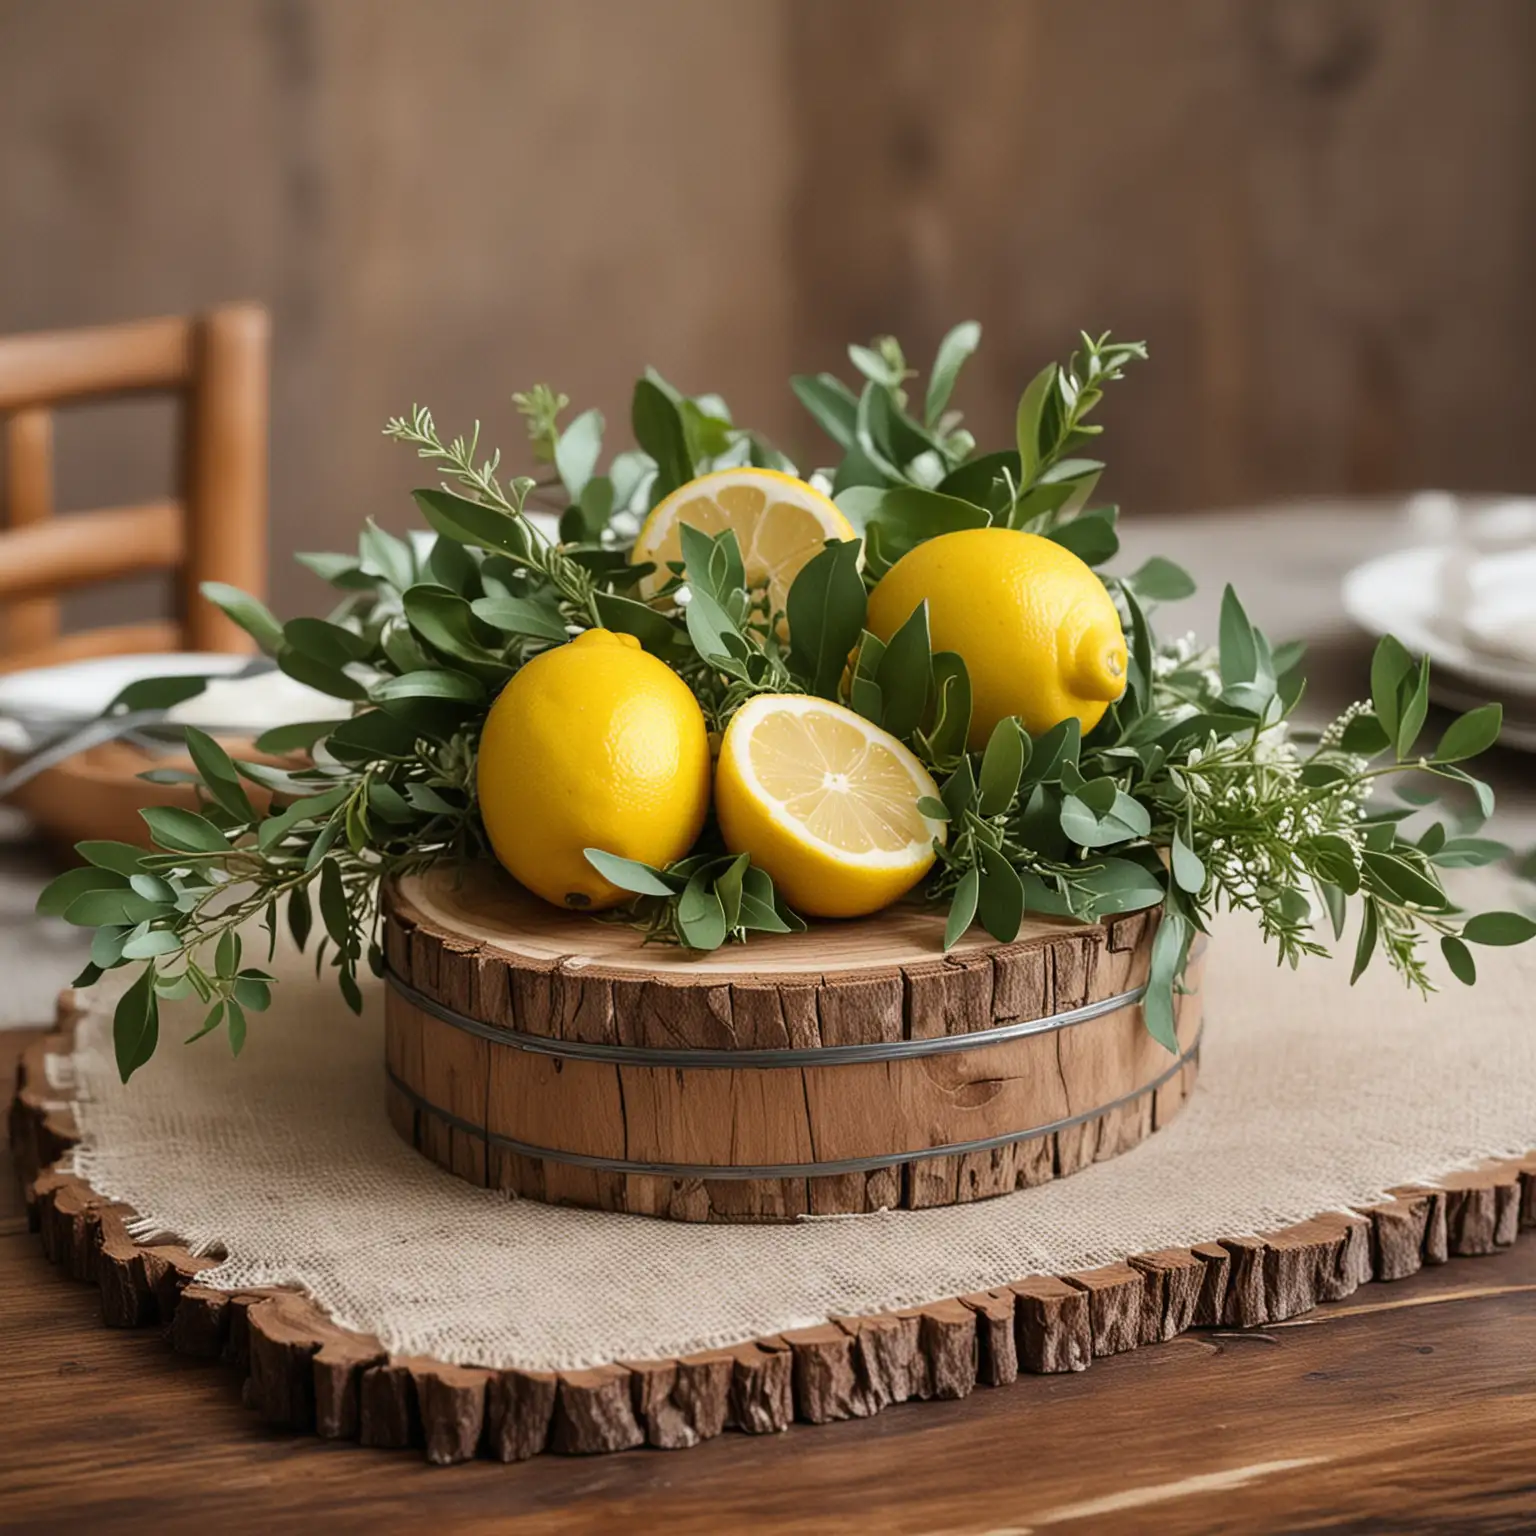 simple rustic wedding centerpiece with a wood slice holding lemons and a yellow tin can that is filled with greenery ; keep background neutral